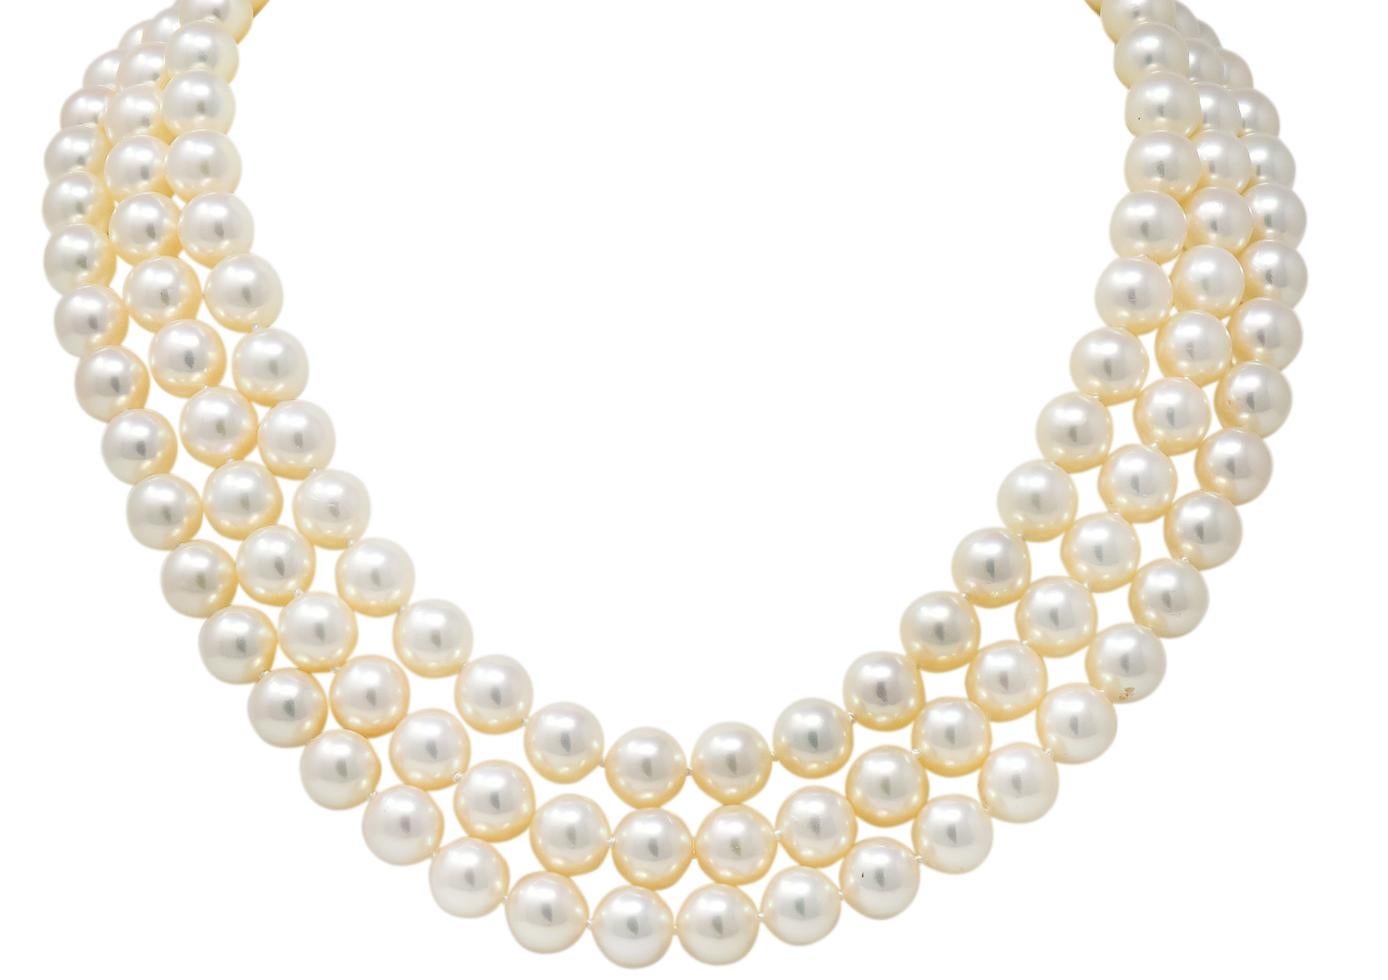 Designed as a hand-knotted three strand necklace with round natural freshwater cultured pearl beads measuring approximately 8.8 mm

Cream in body color with silver and some rosé overtones, very well matched

With a scalloped gold bar separating two